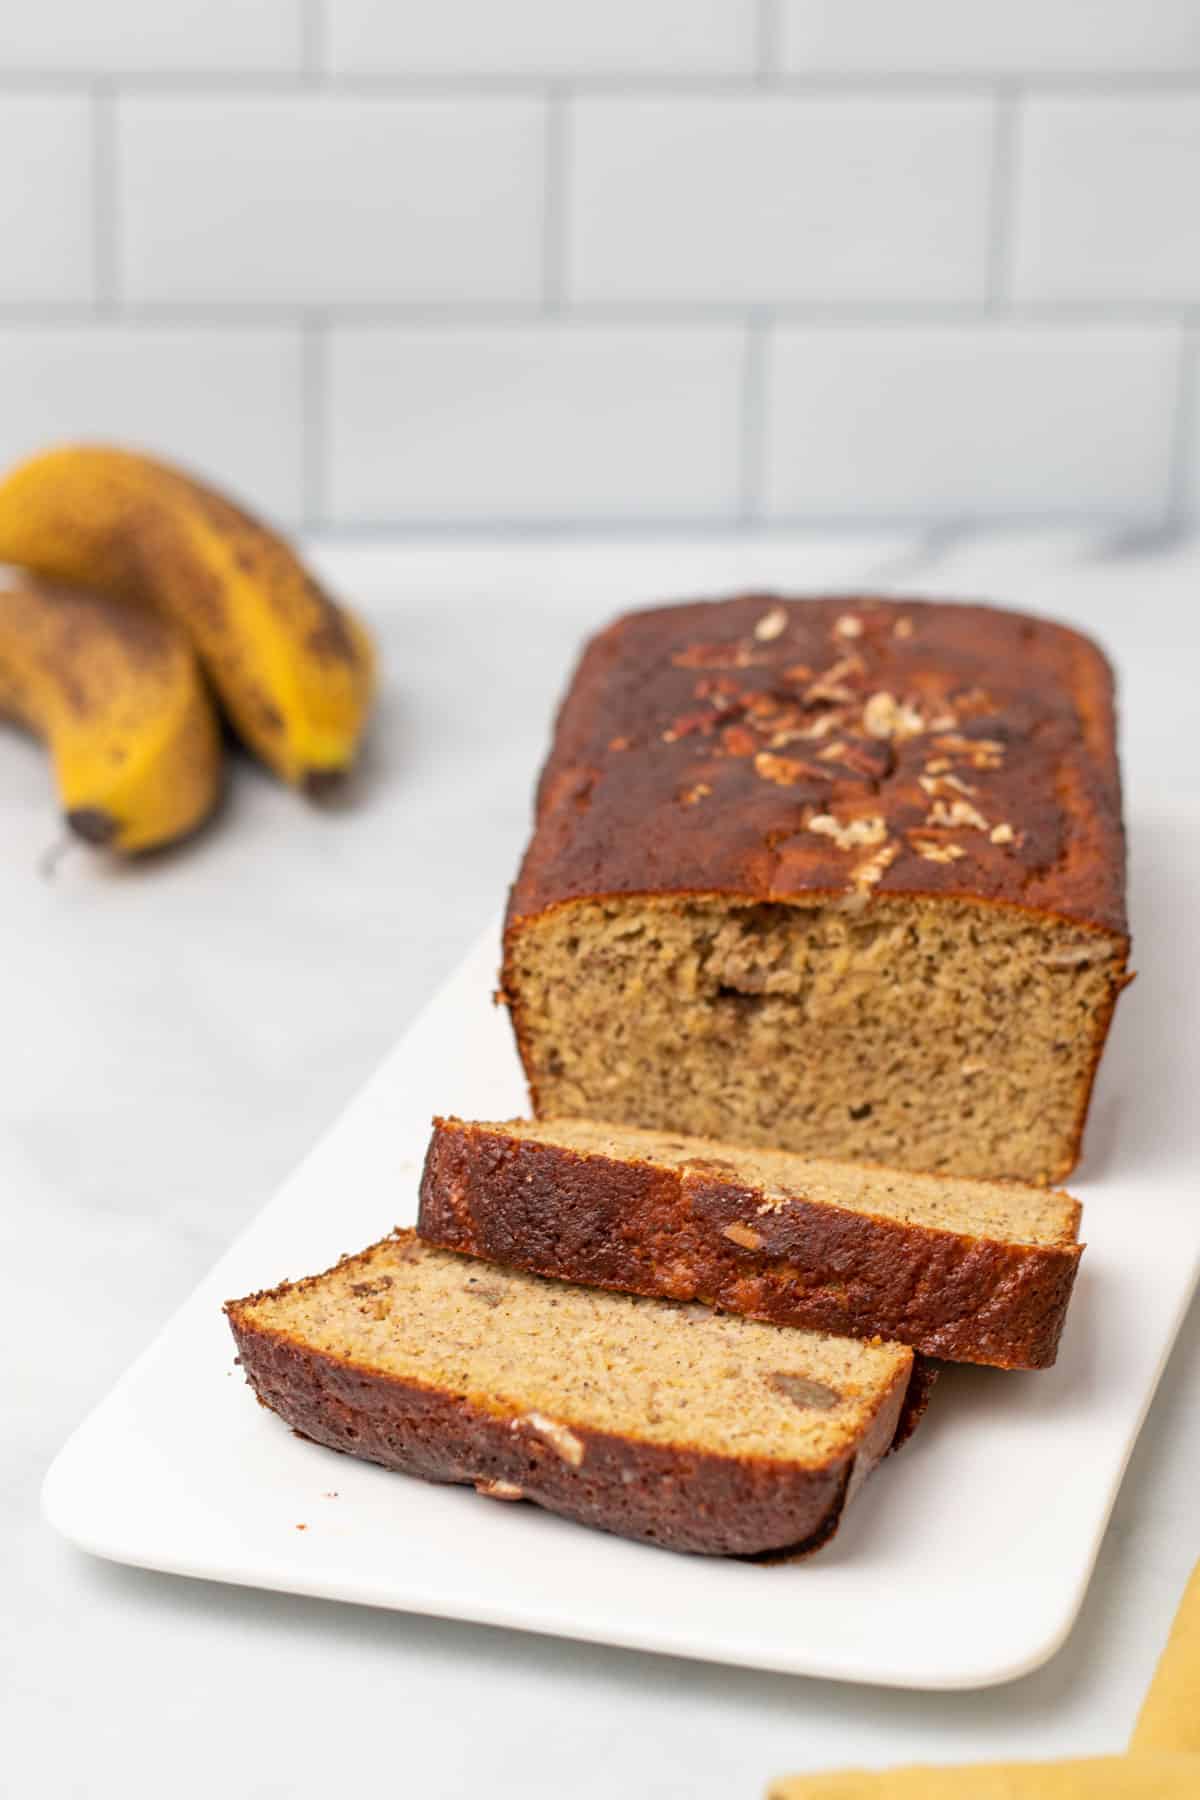 Loaf of banana bread with 2 slices cut